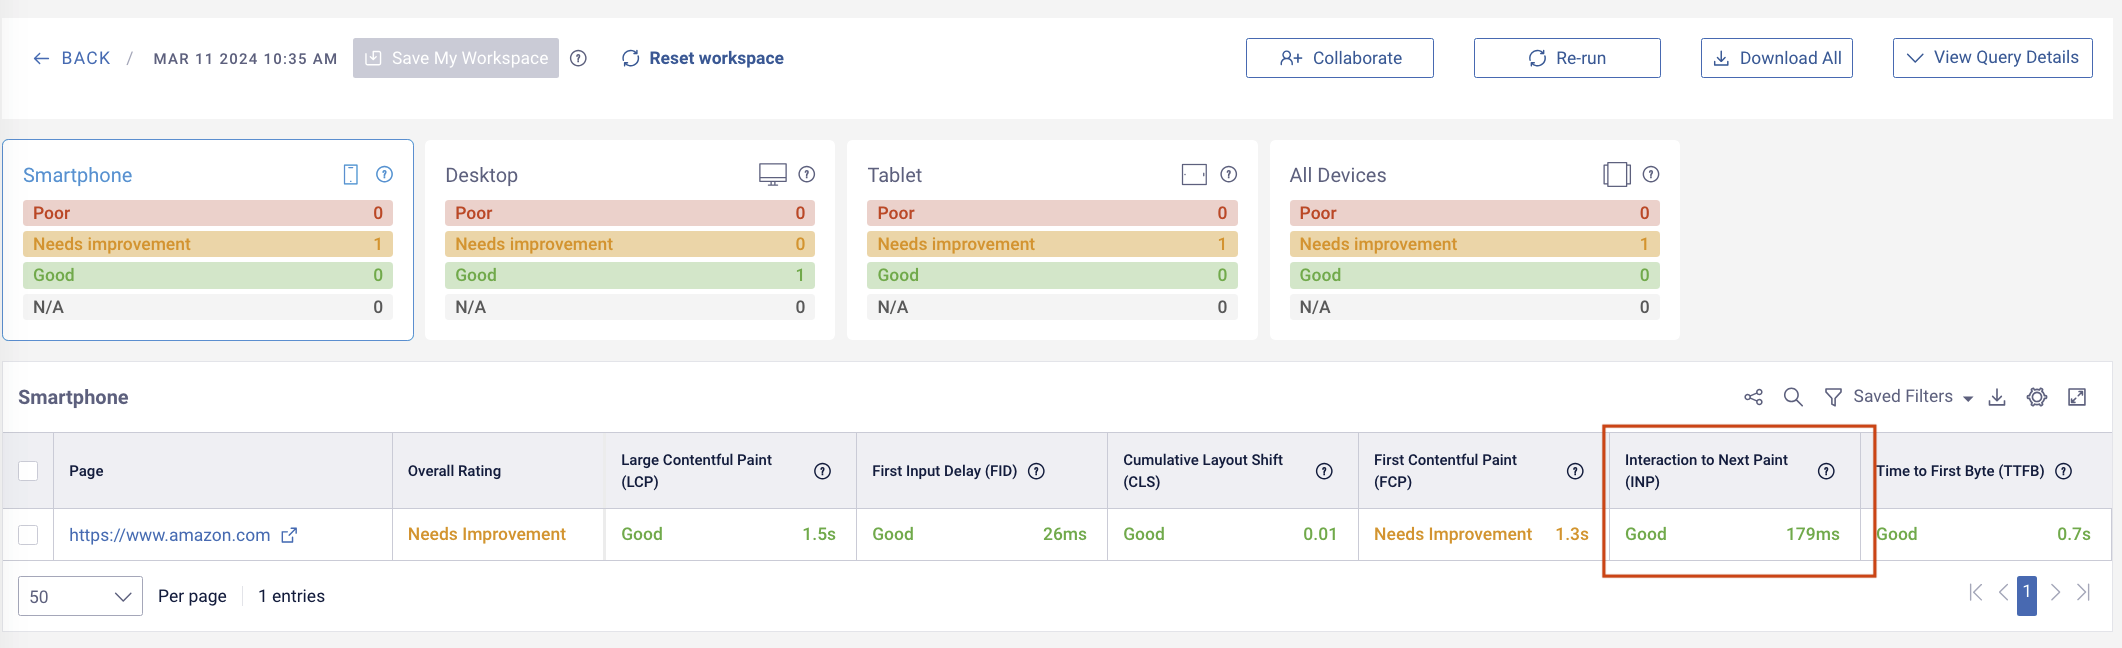 BrightEdge Instant shows real time ranking insights like INP